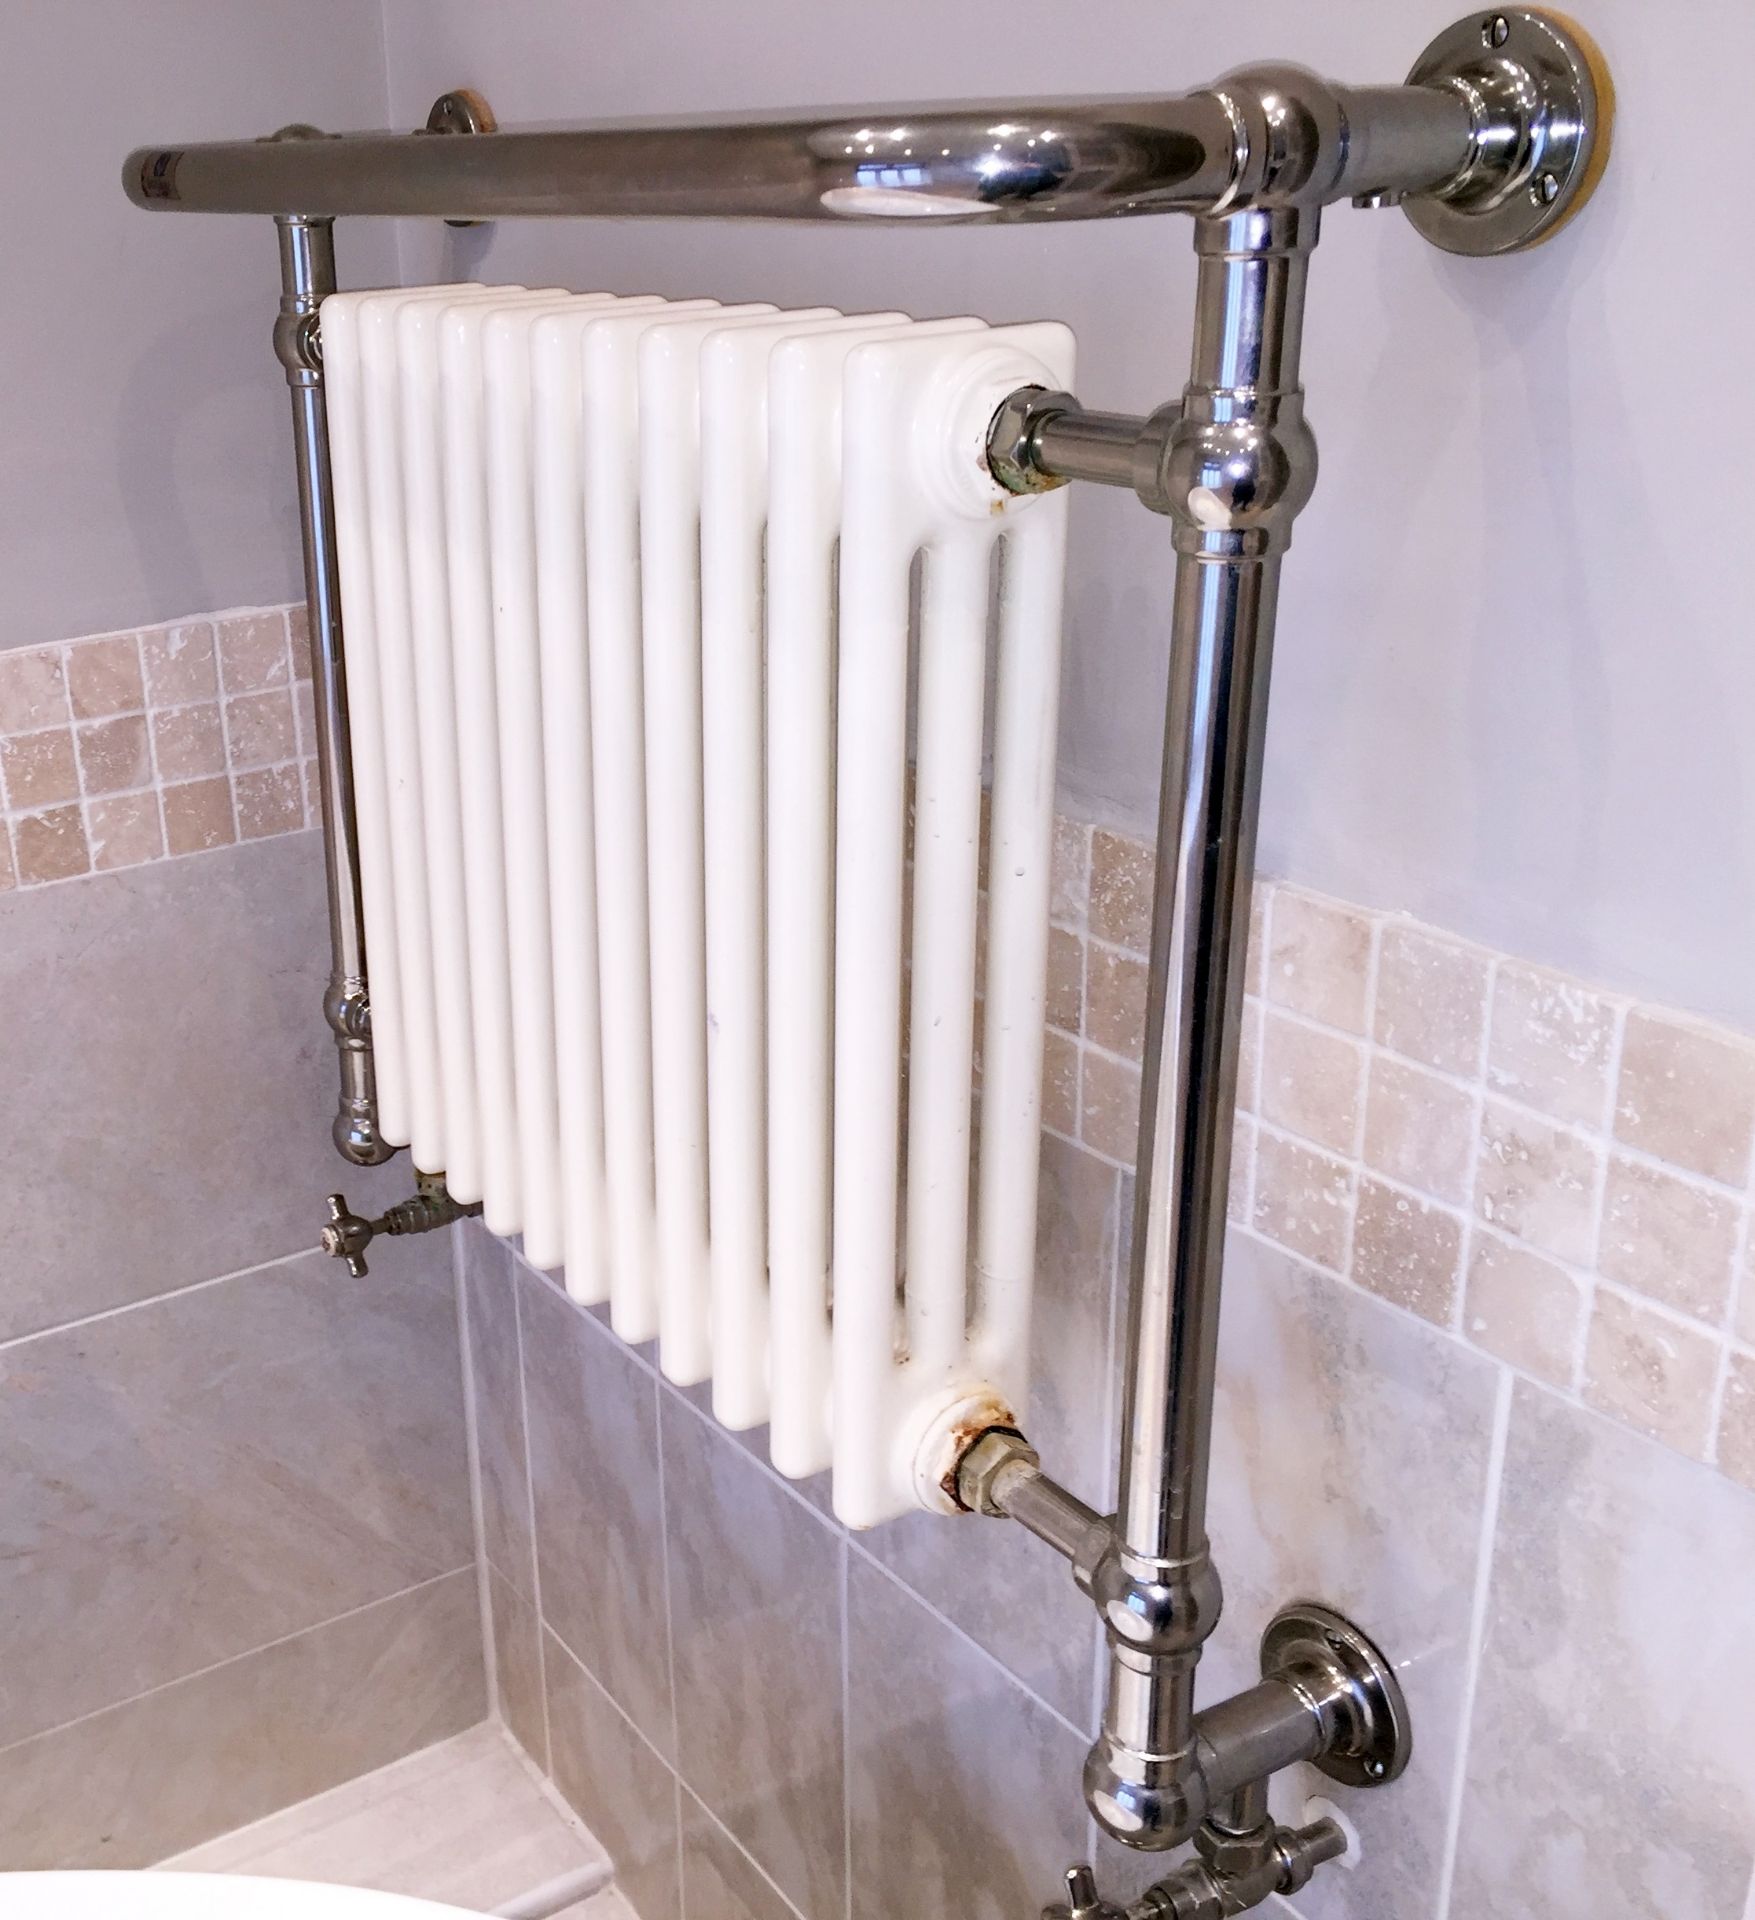 2 x Matching Radiators - Dimensions Width 80cm x Height 74cm x Depth 25cm - Preowned In Good - Image 2 of 6